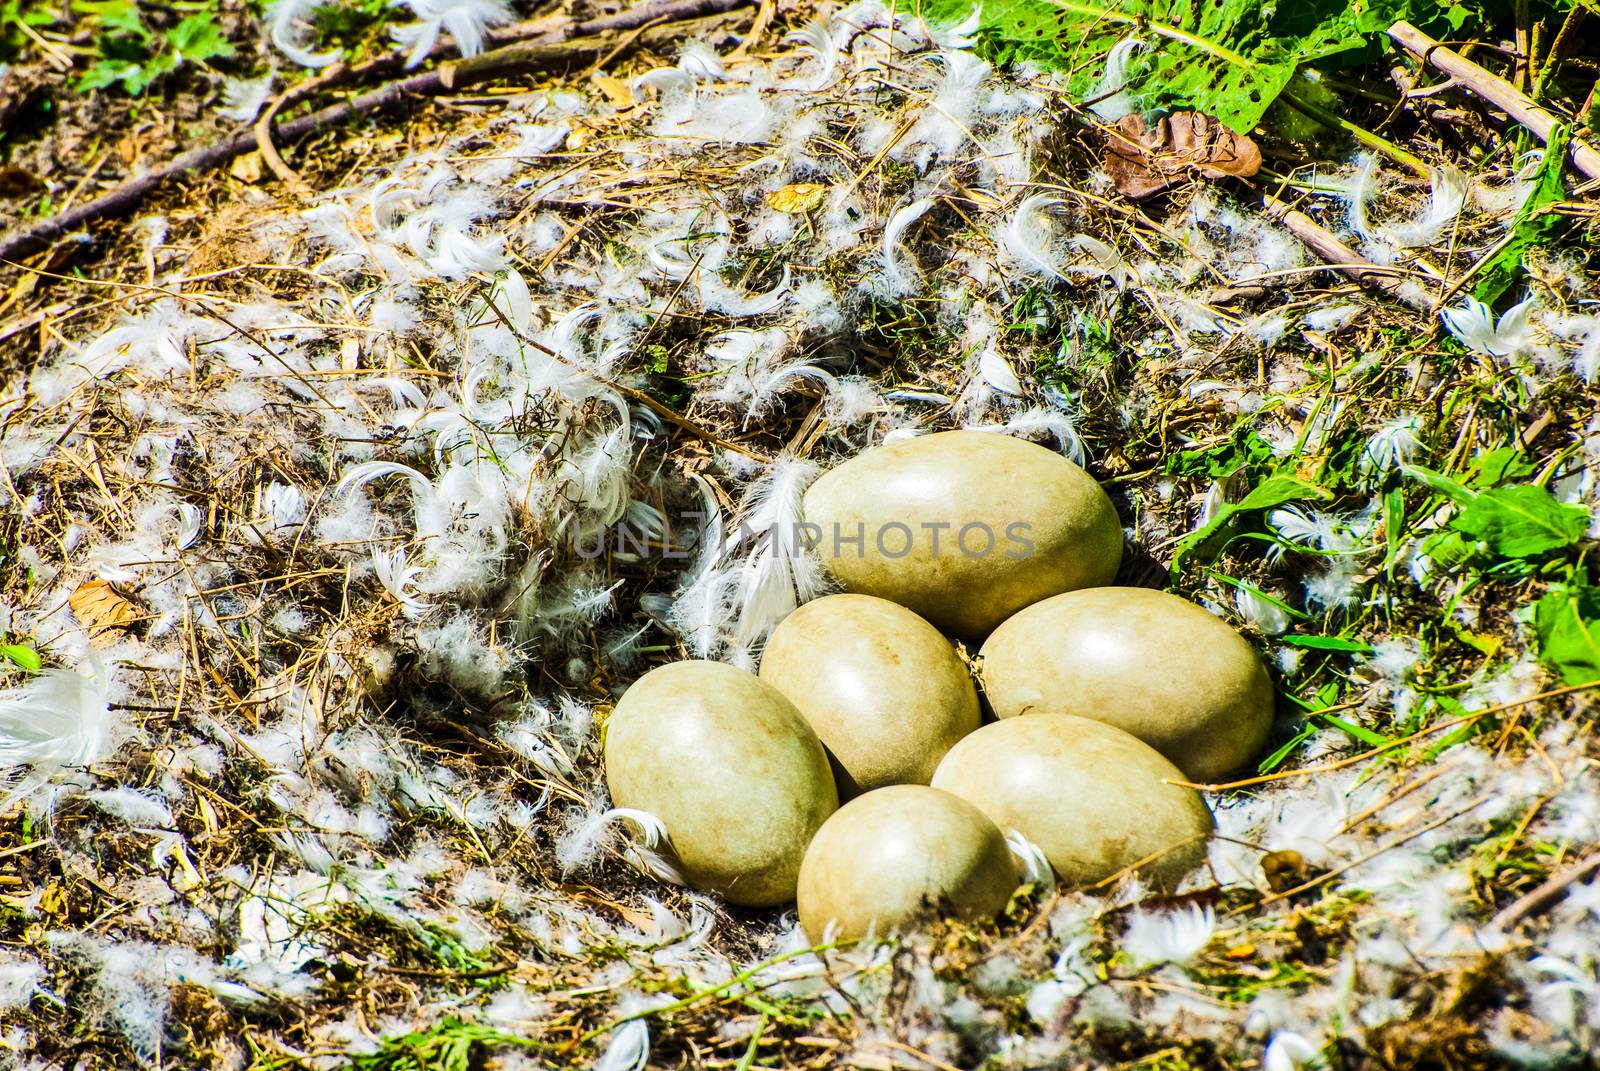 Ground Pheasant nest with six eggs